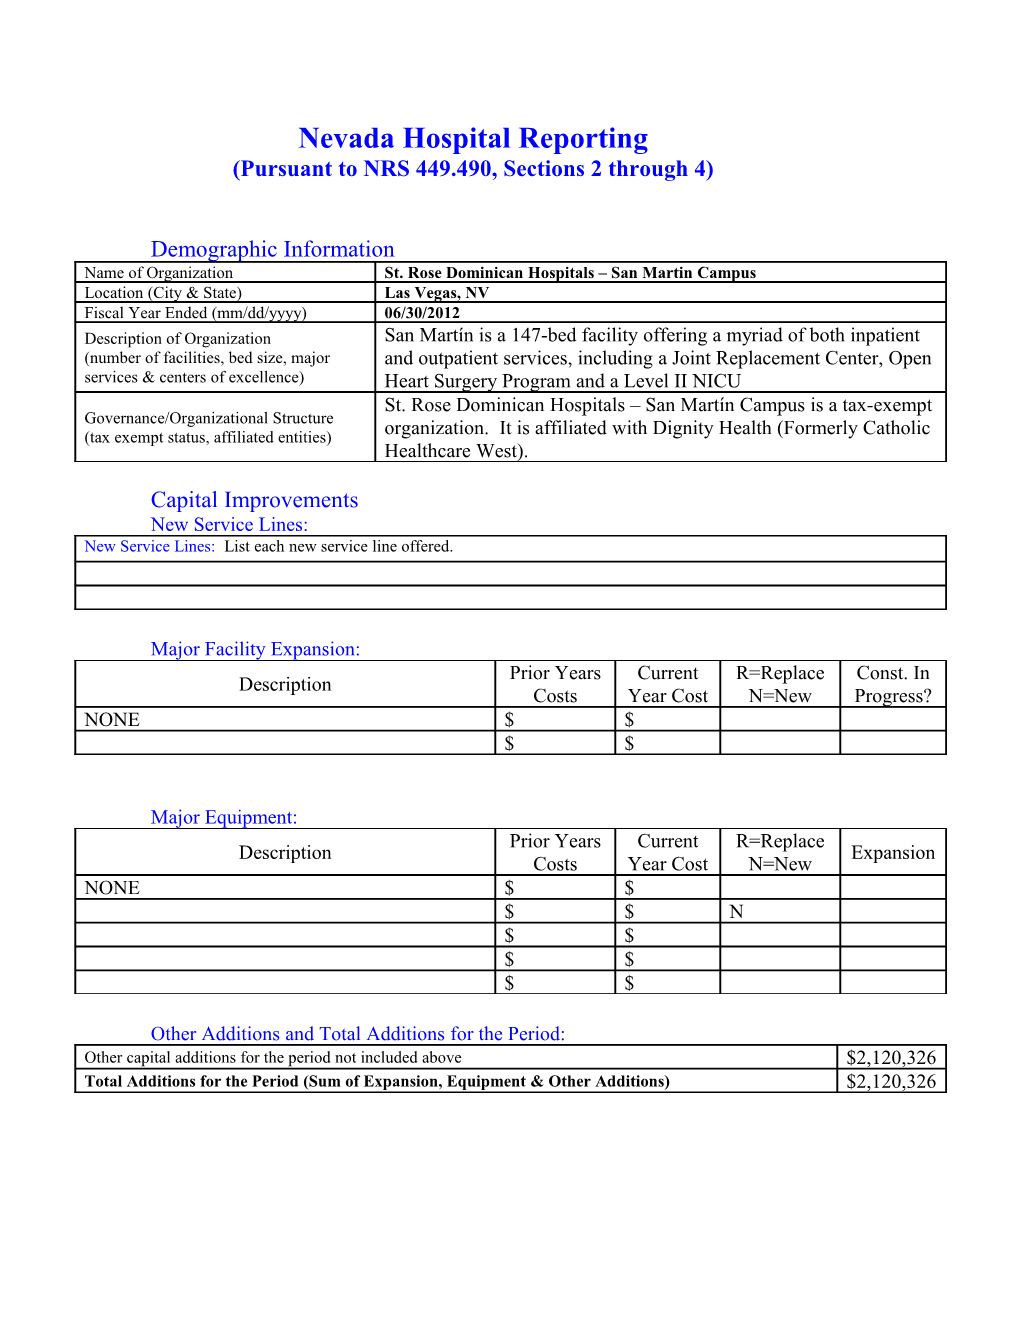 Nevada Community Benefit Reporting Template s2